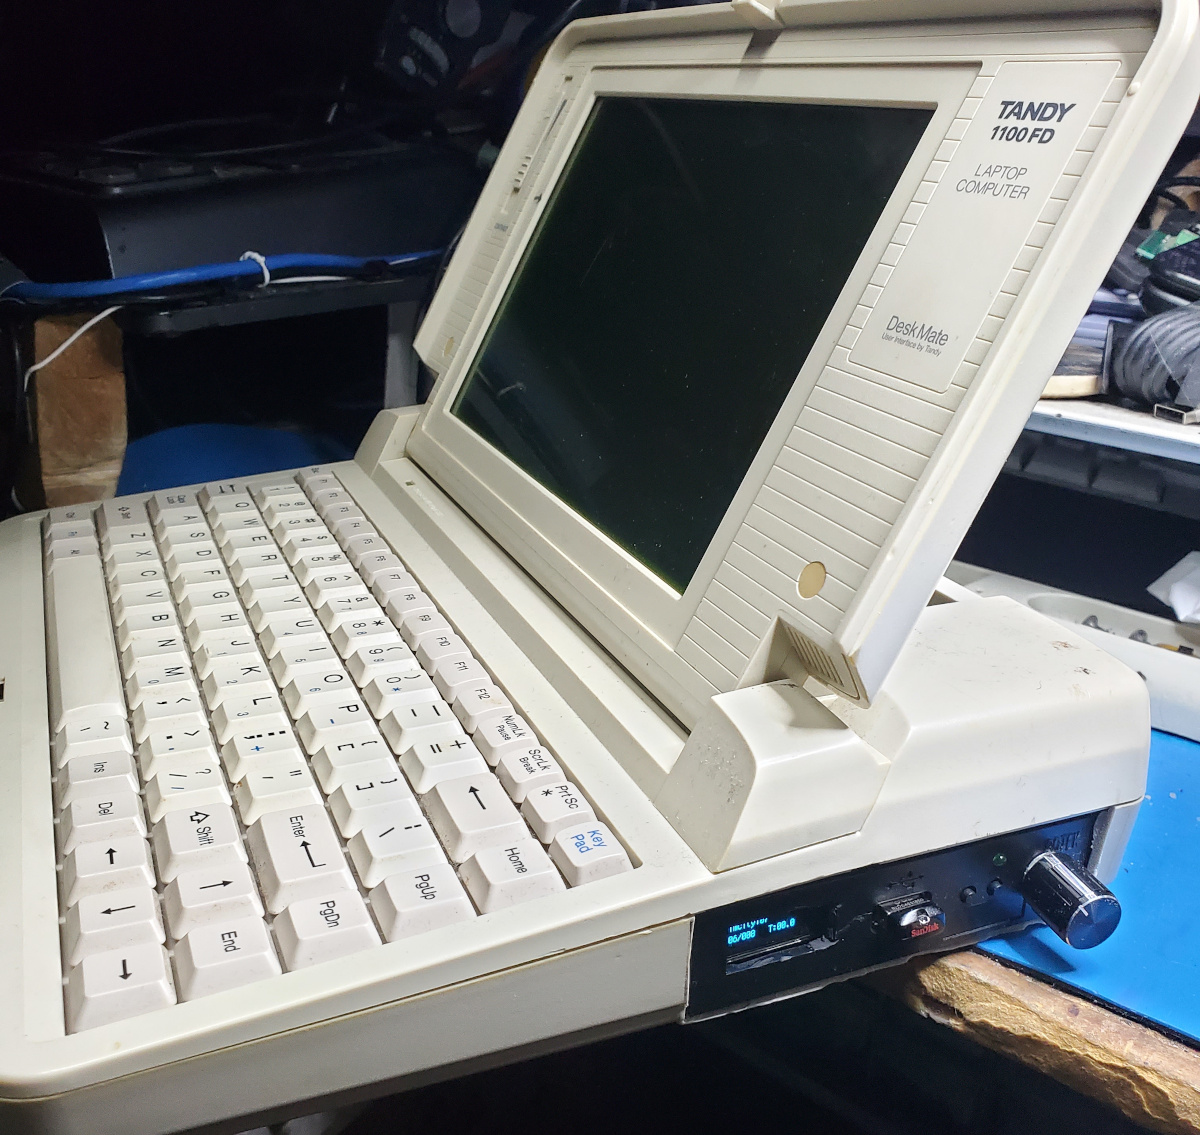 Side view of the Tandy 1100FD, with the screen in the upright position. A Gotek floppy emulator with LCD and jog dial mods is installed in the side where the floppy drive used to be.